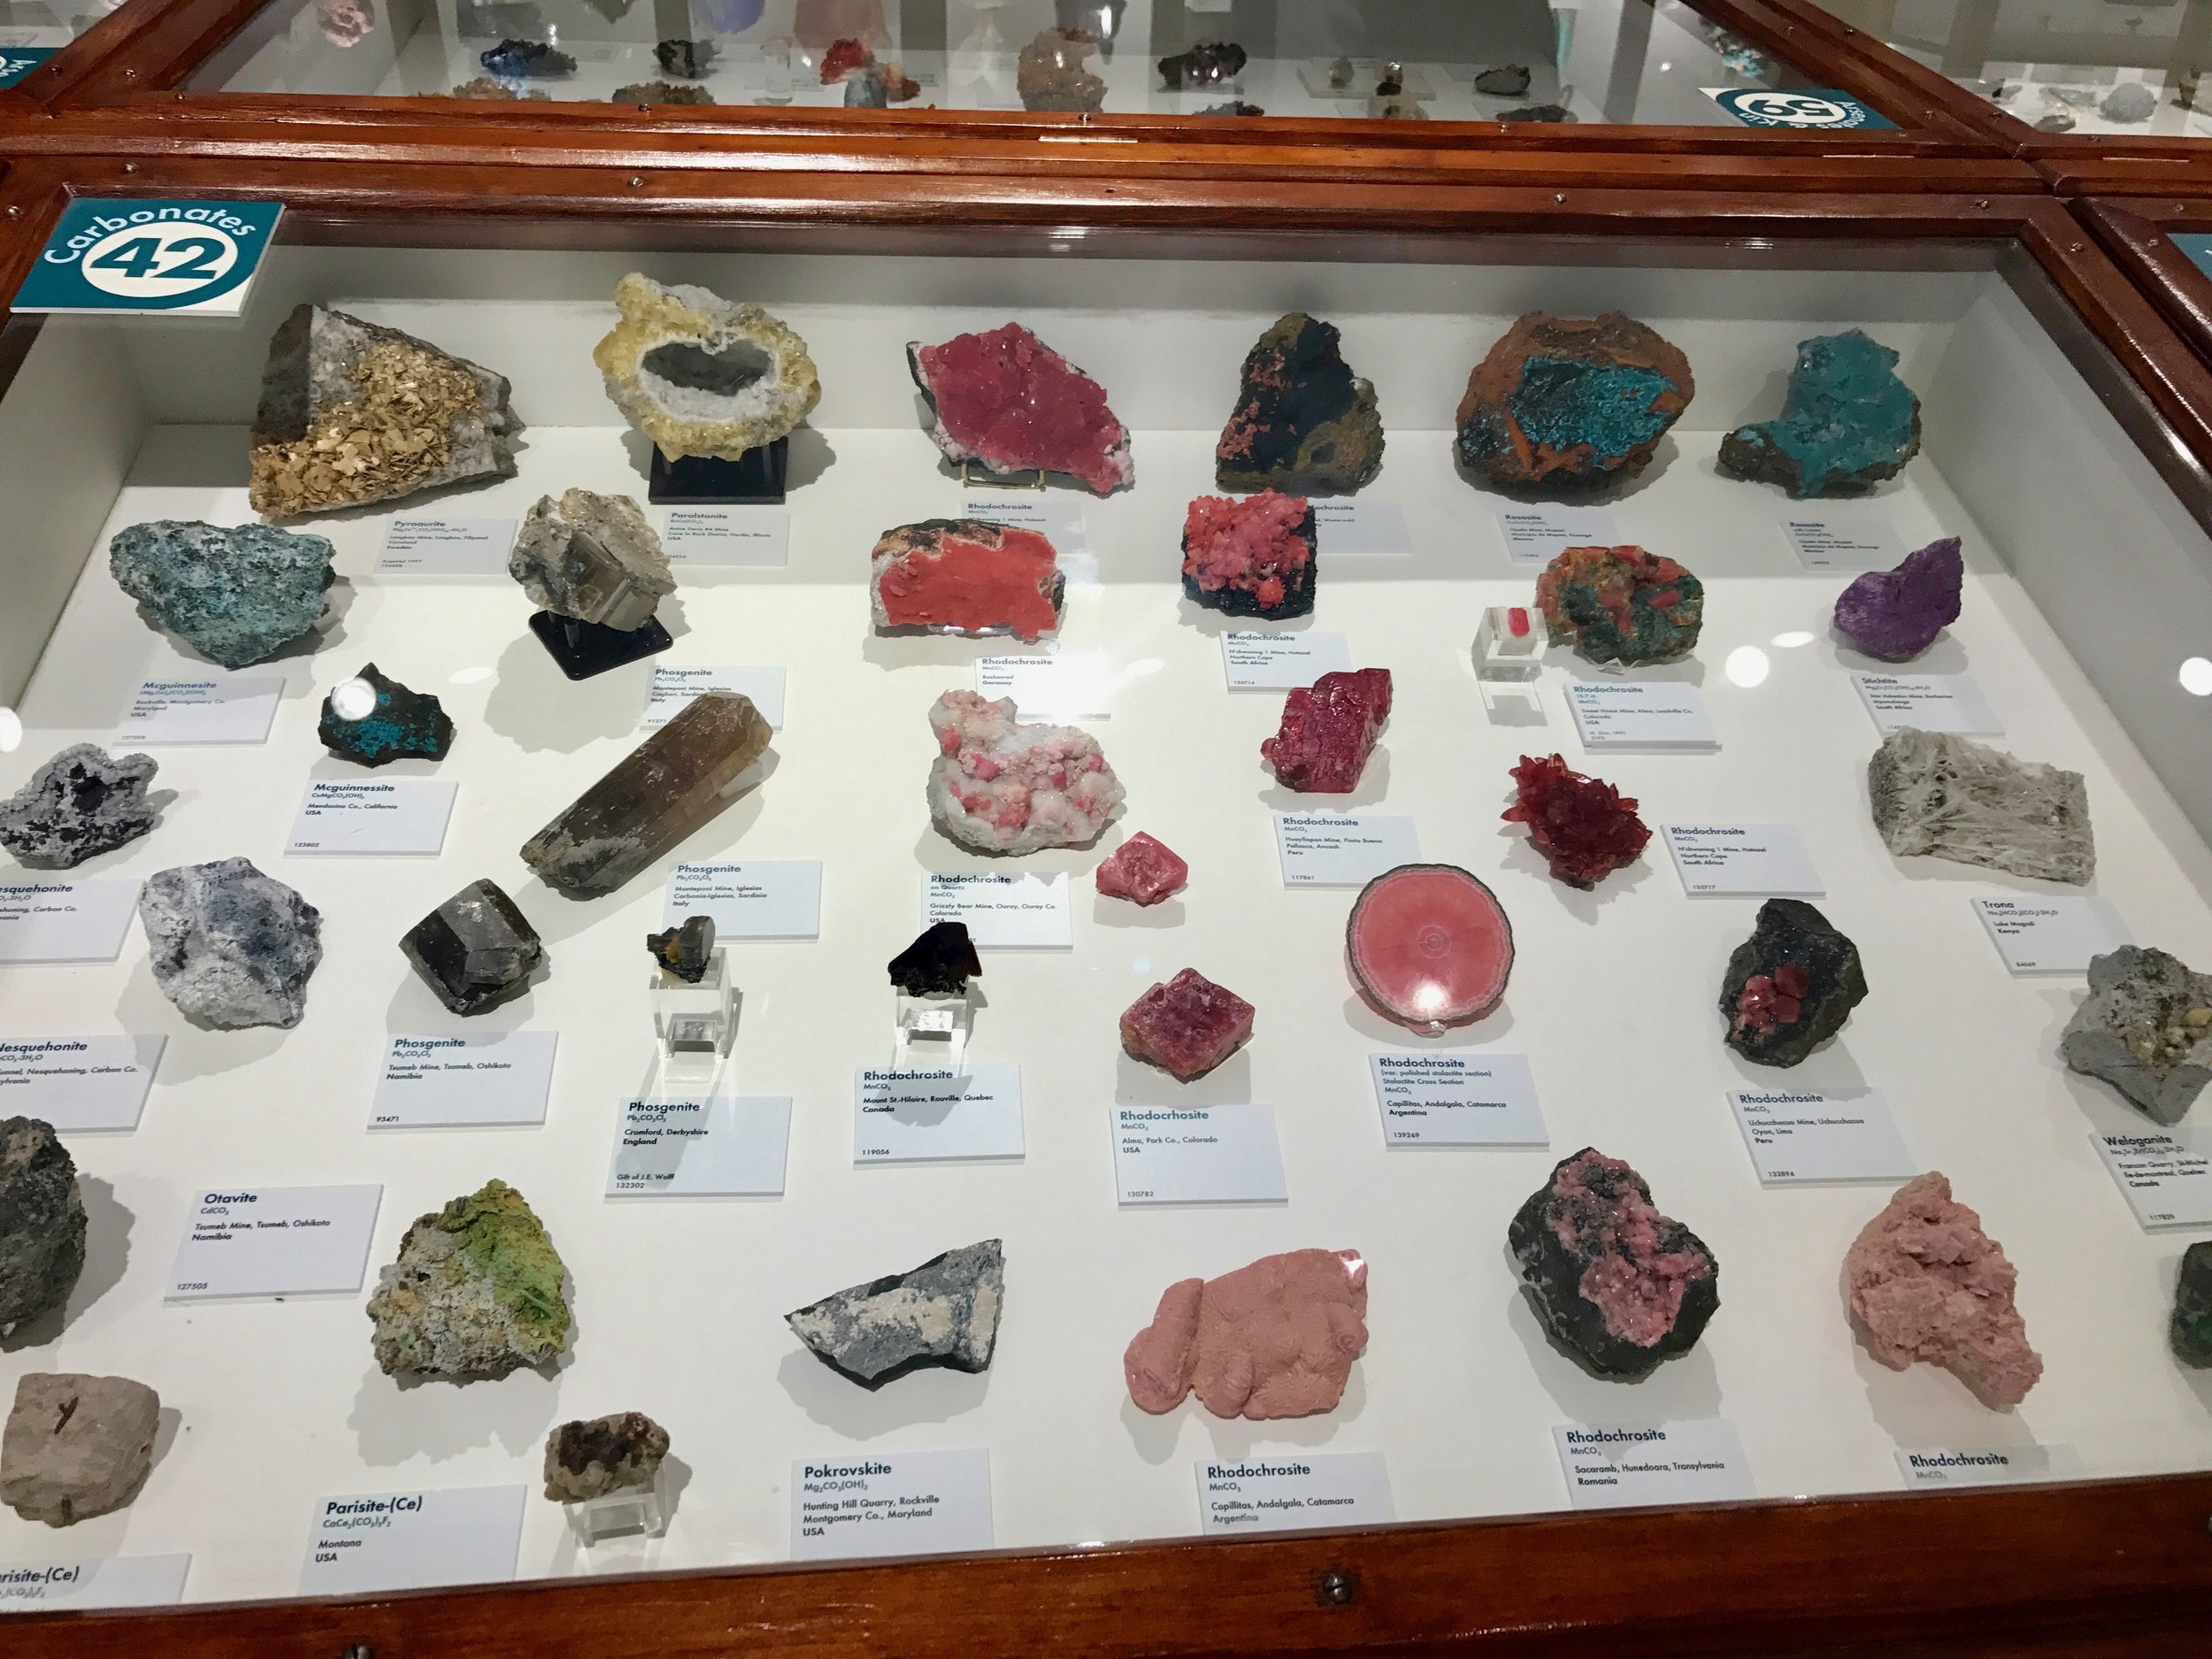 Cases upon cases of minerals